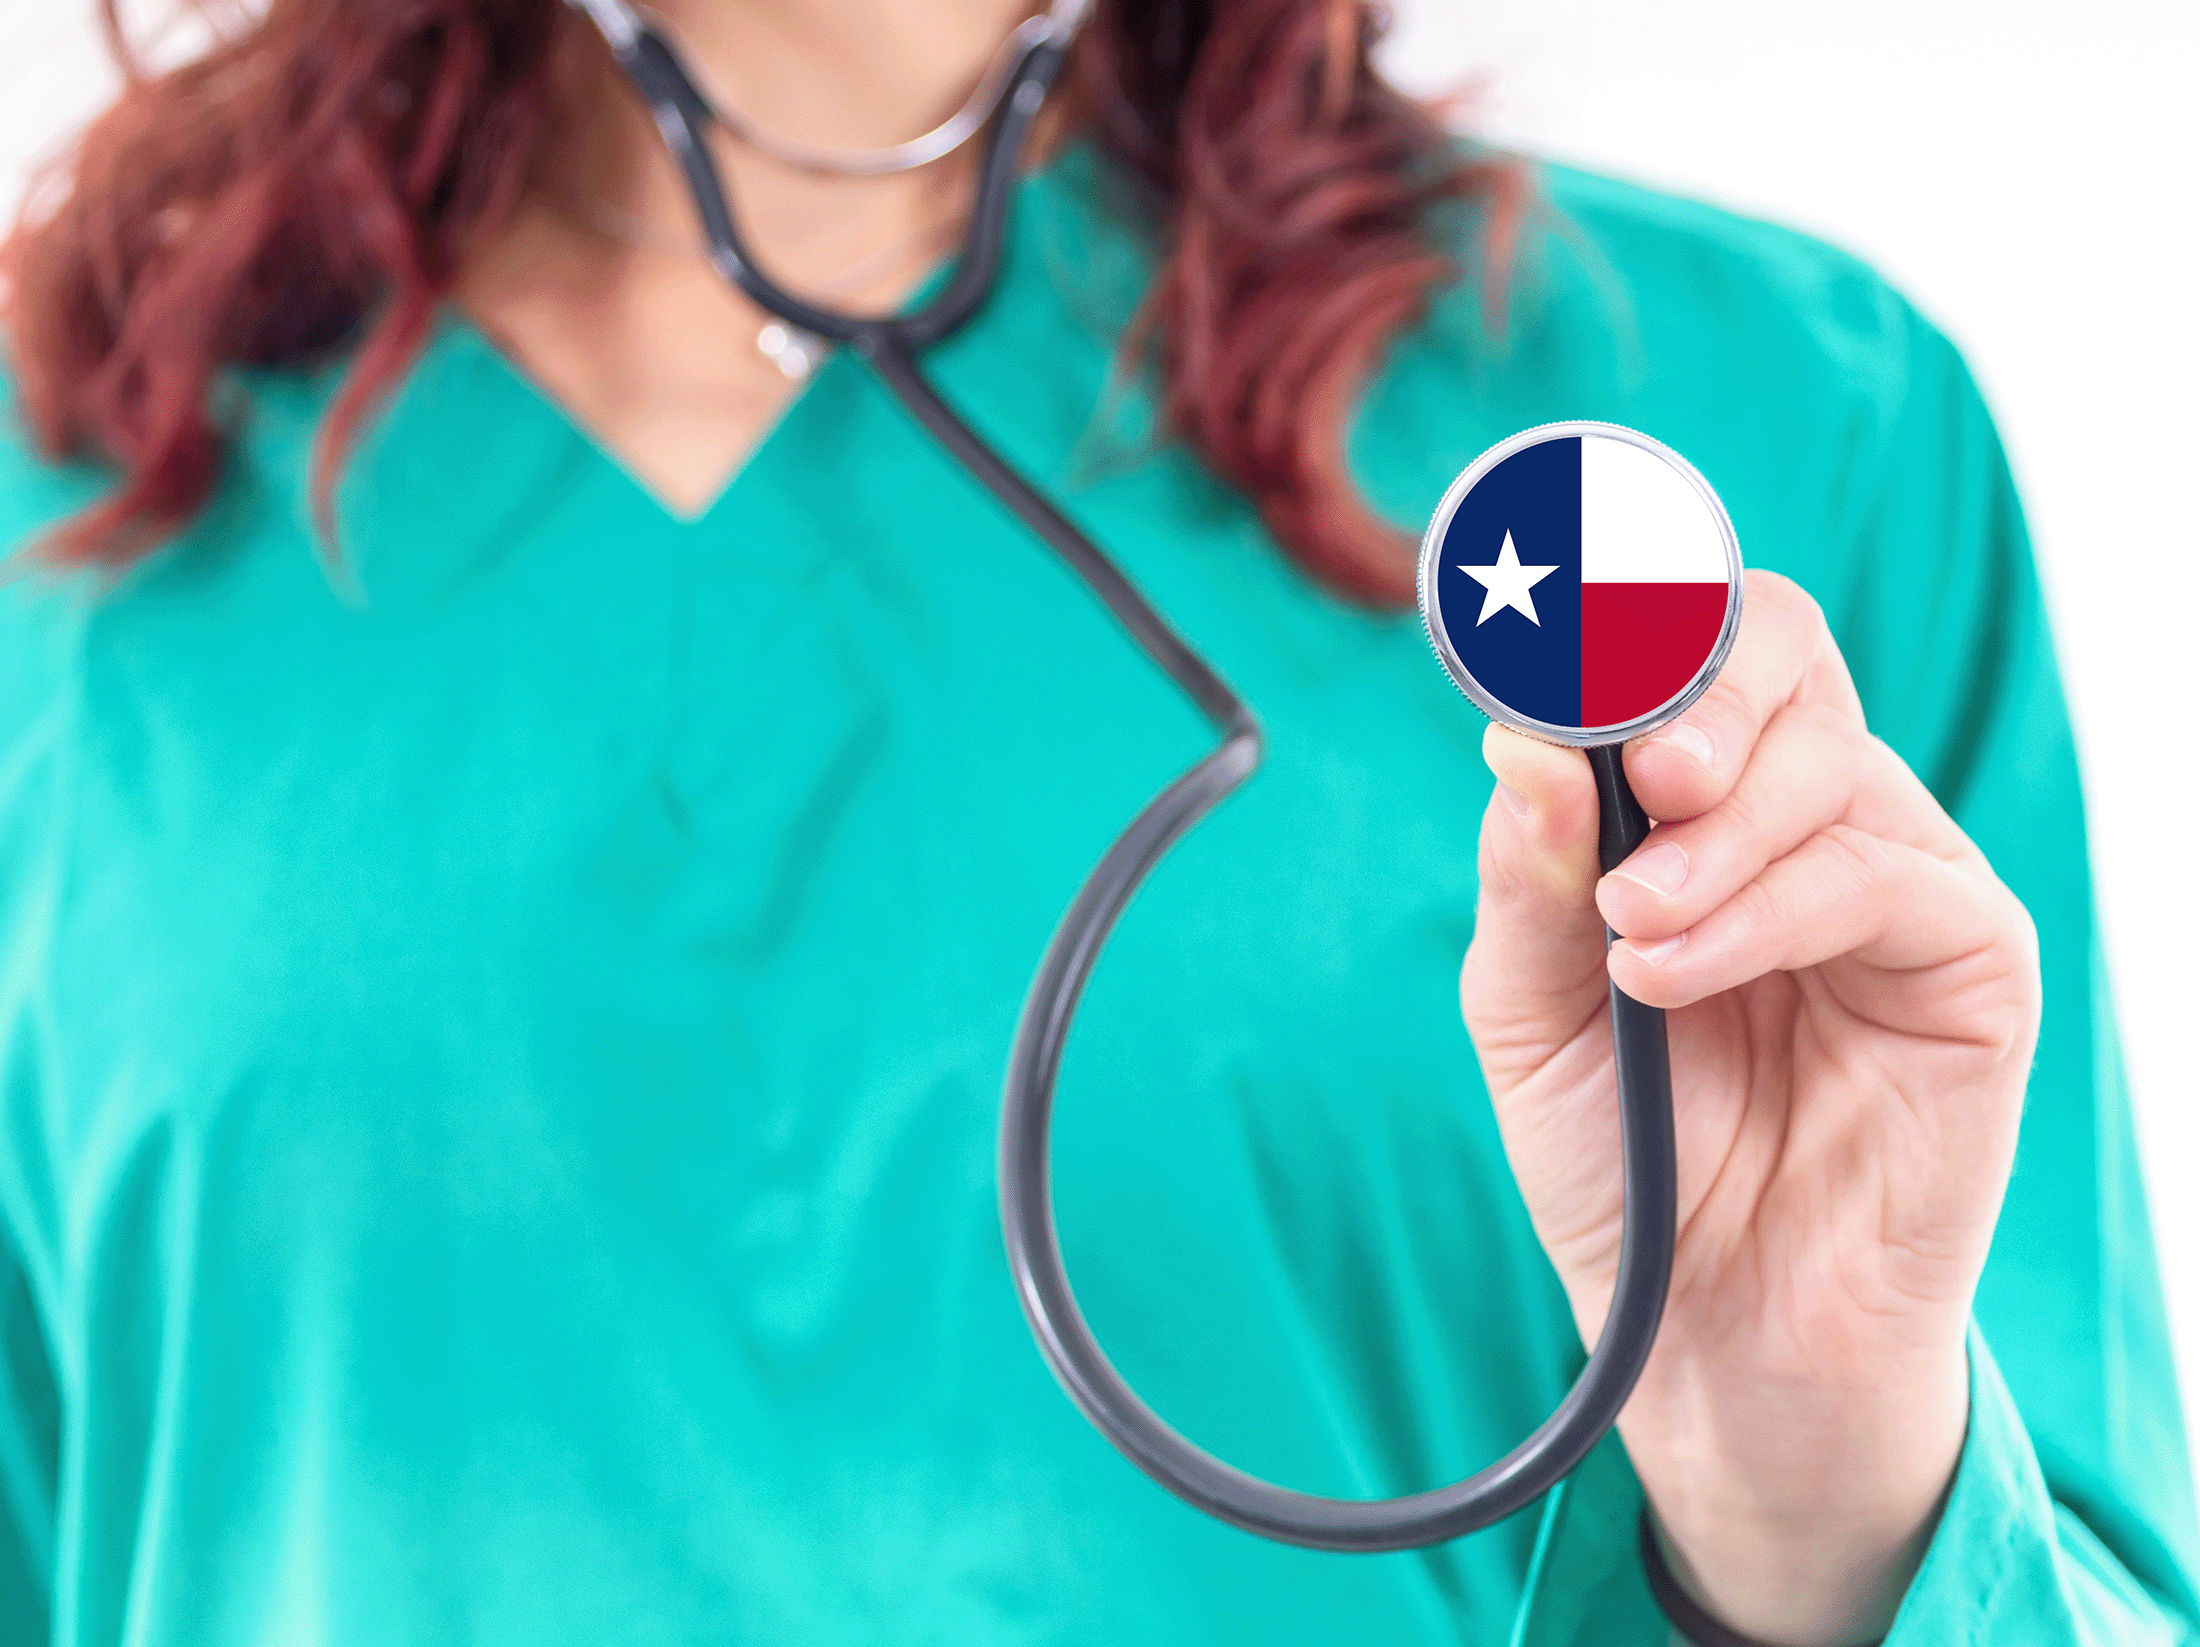 A nurse holding up a stethoscope with Texas flag image on it